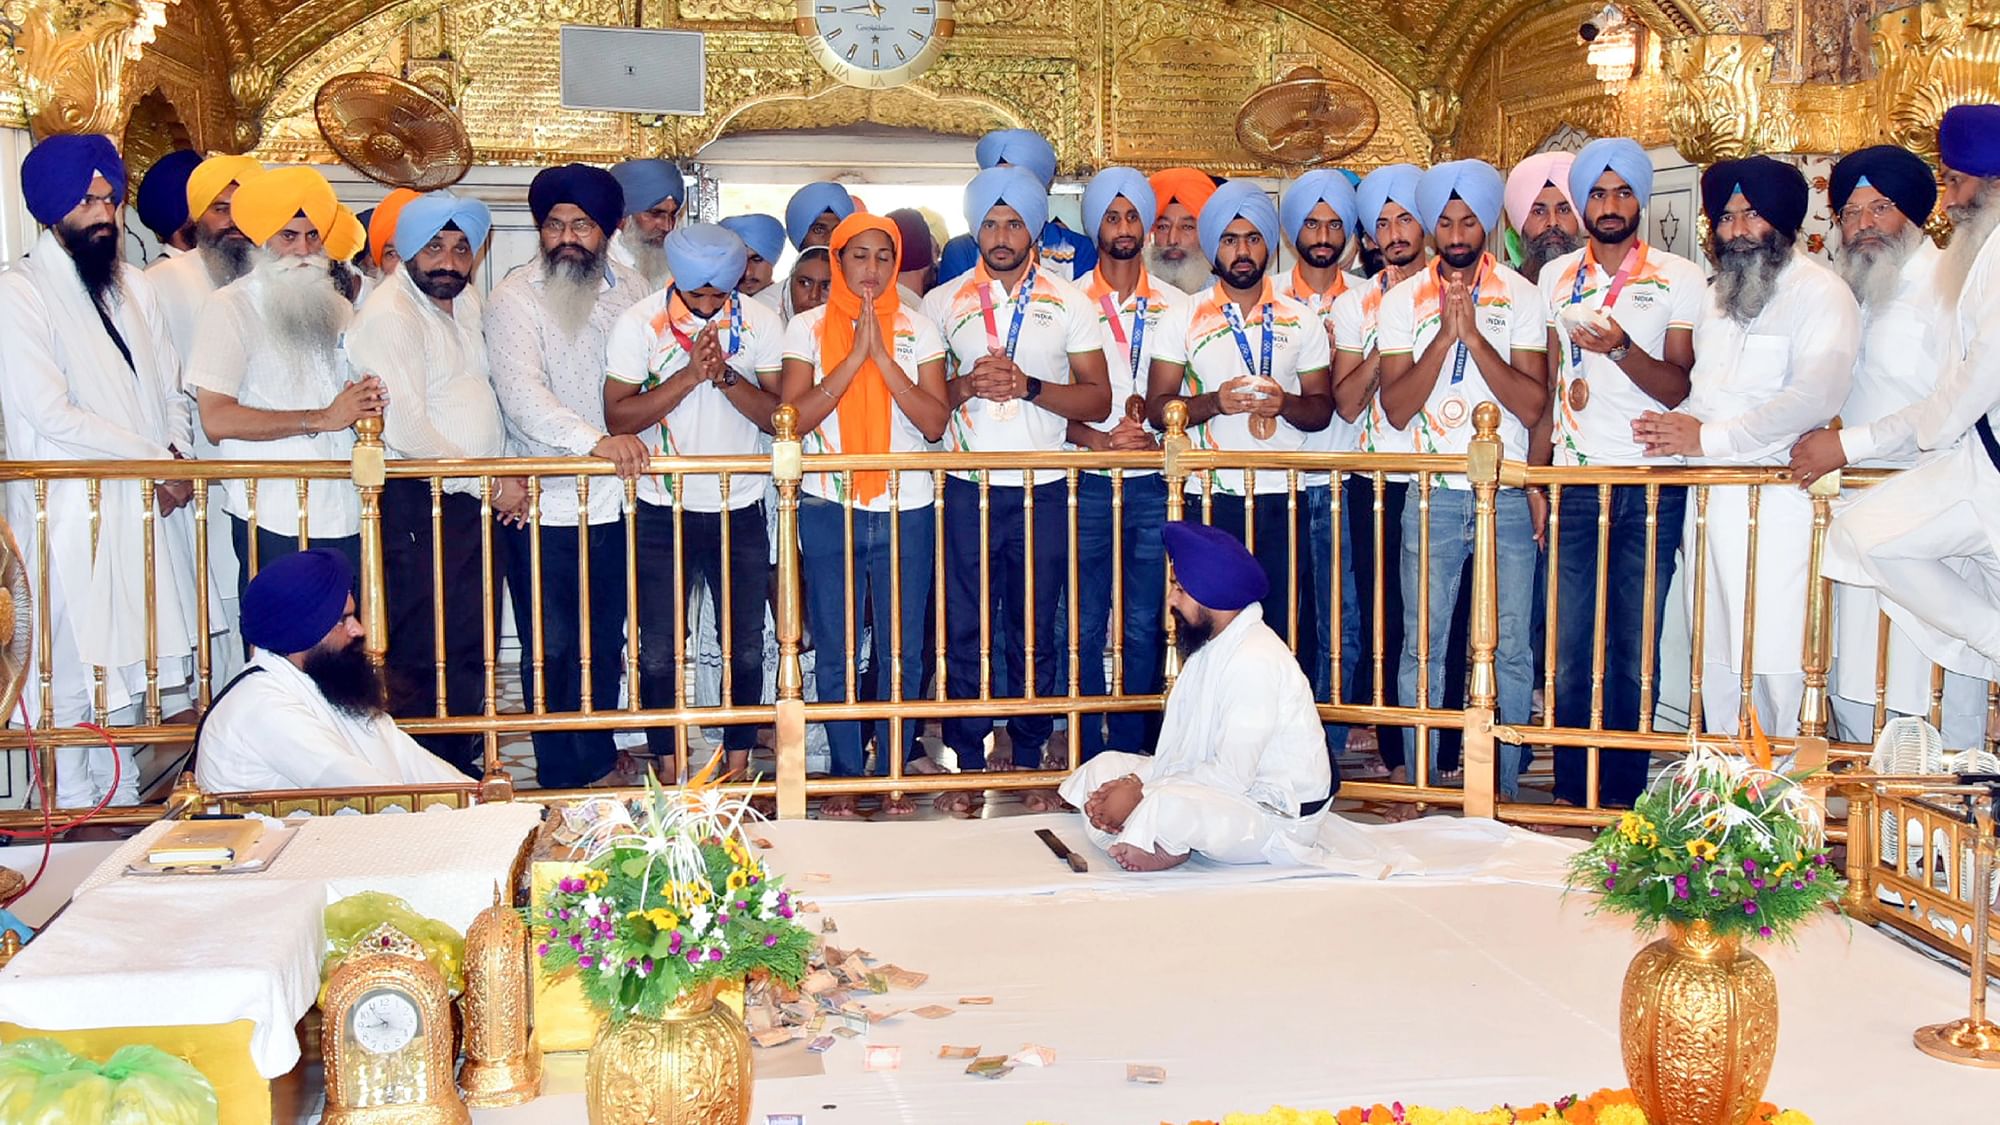 <div class="paragraphs"><p>Players of the Indian men's hockey team at the Golden Temple&nbsp;</p></div>